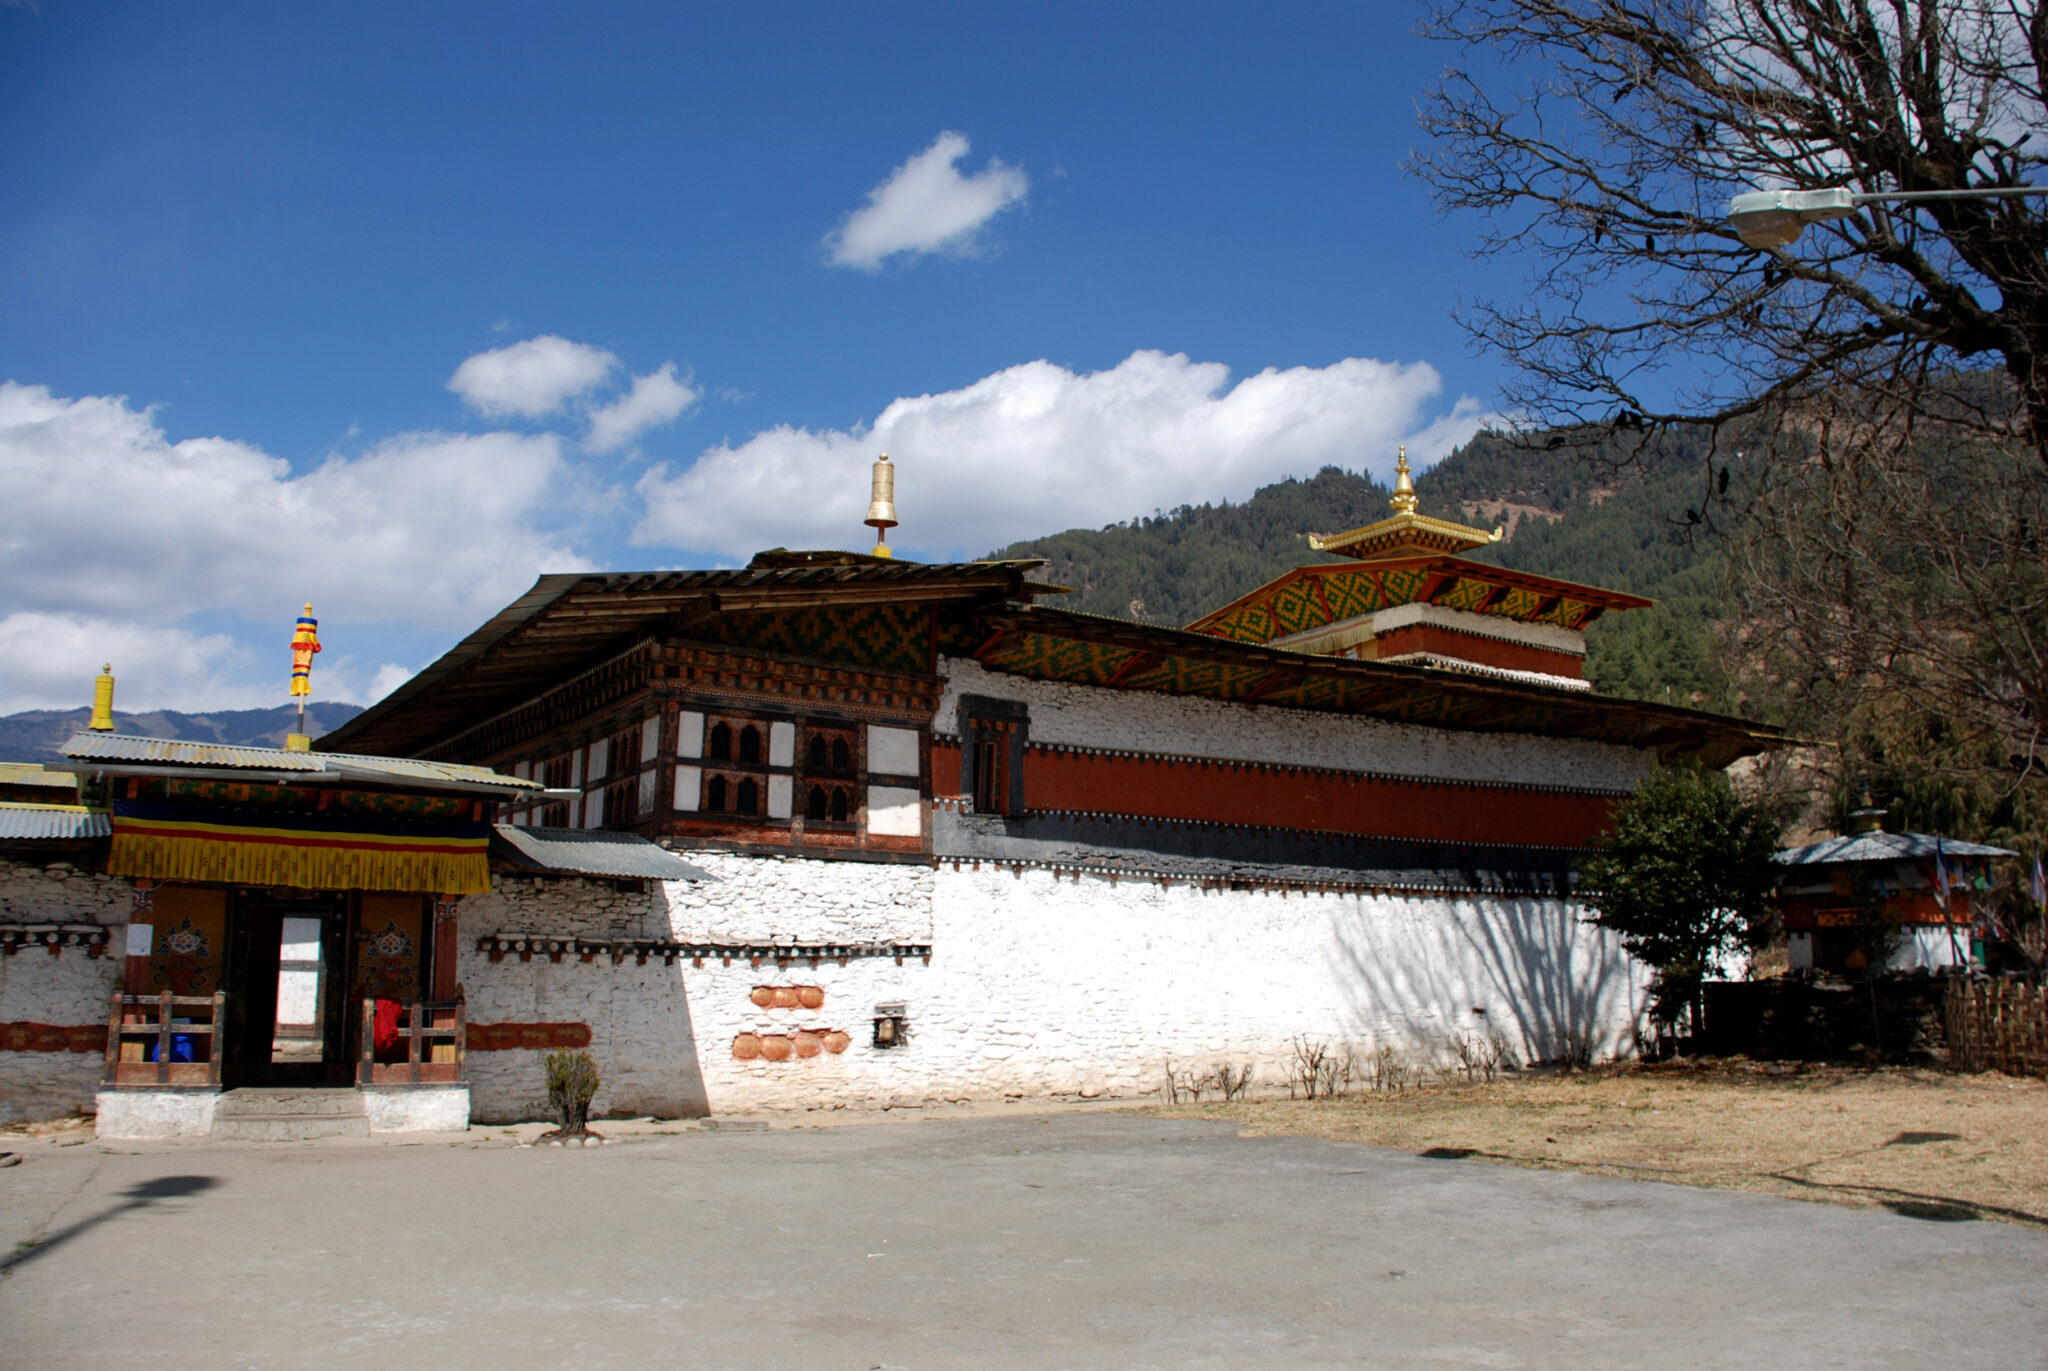 Exterior view of whitewashed temple featuring irregular roofline, ornamented eaves and brackets, and golden pagoda tower